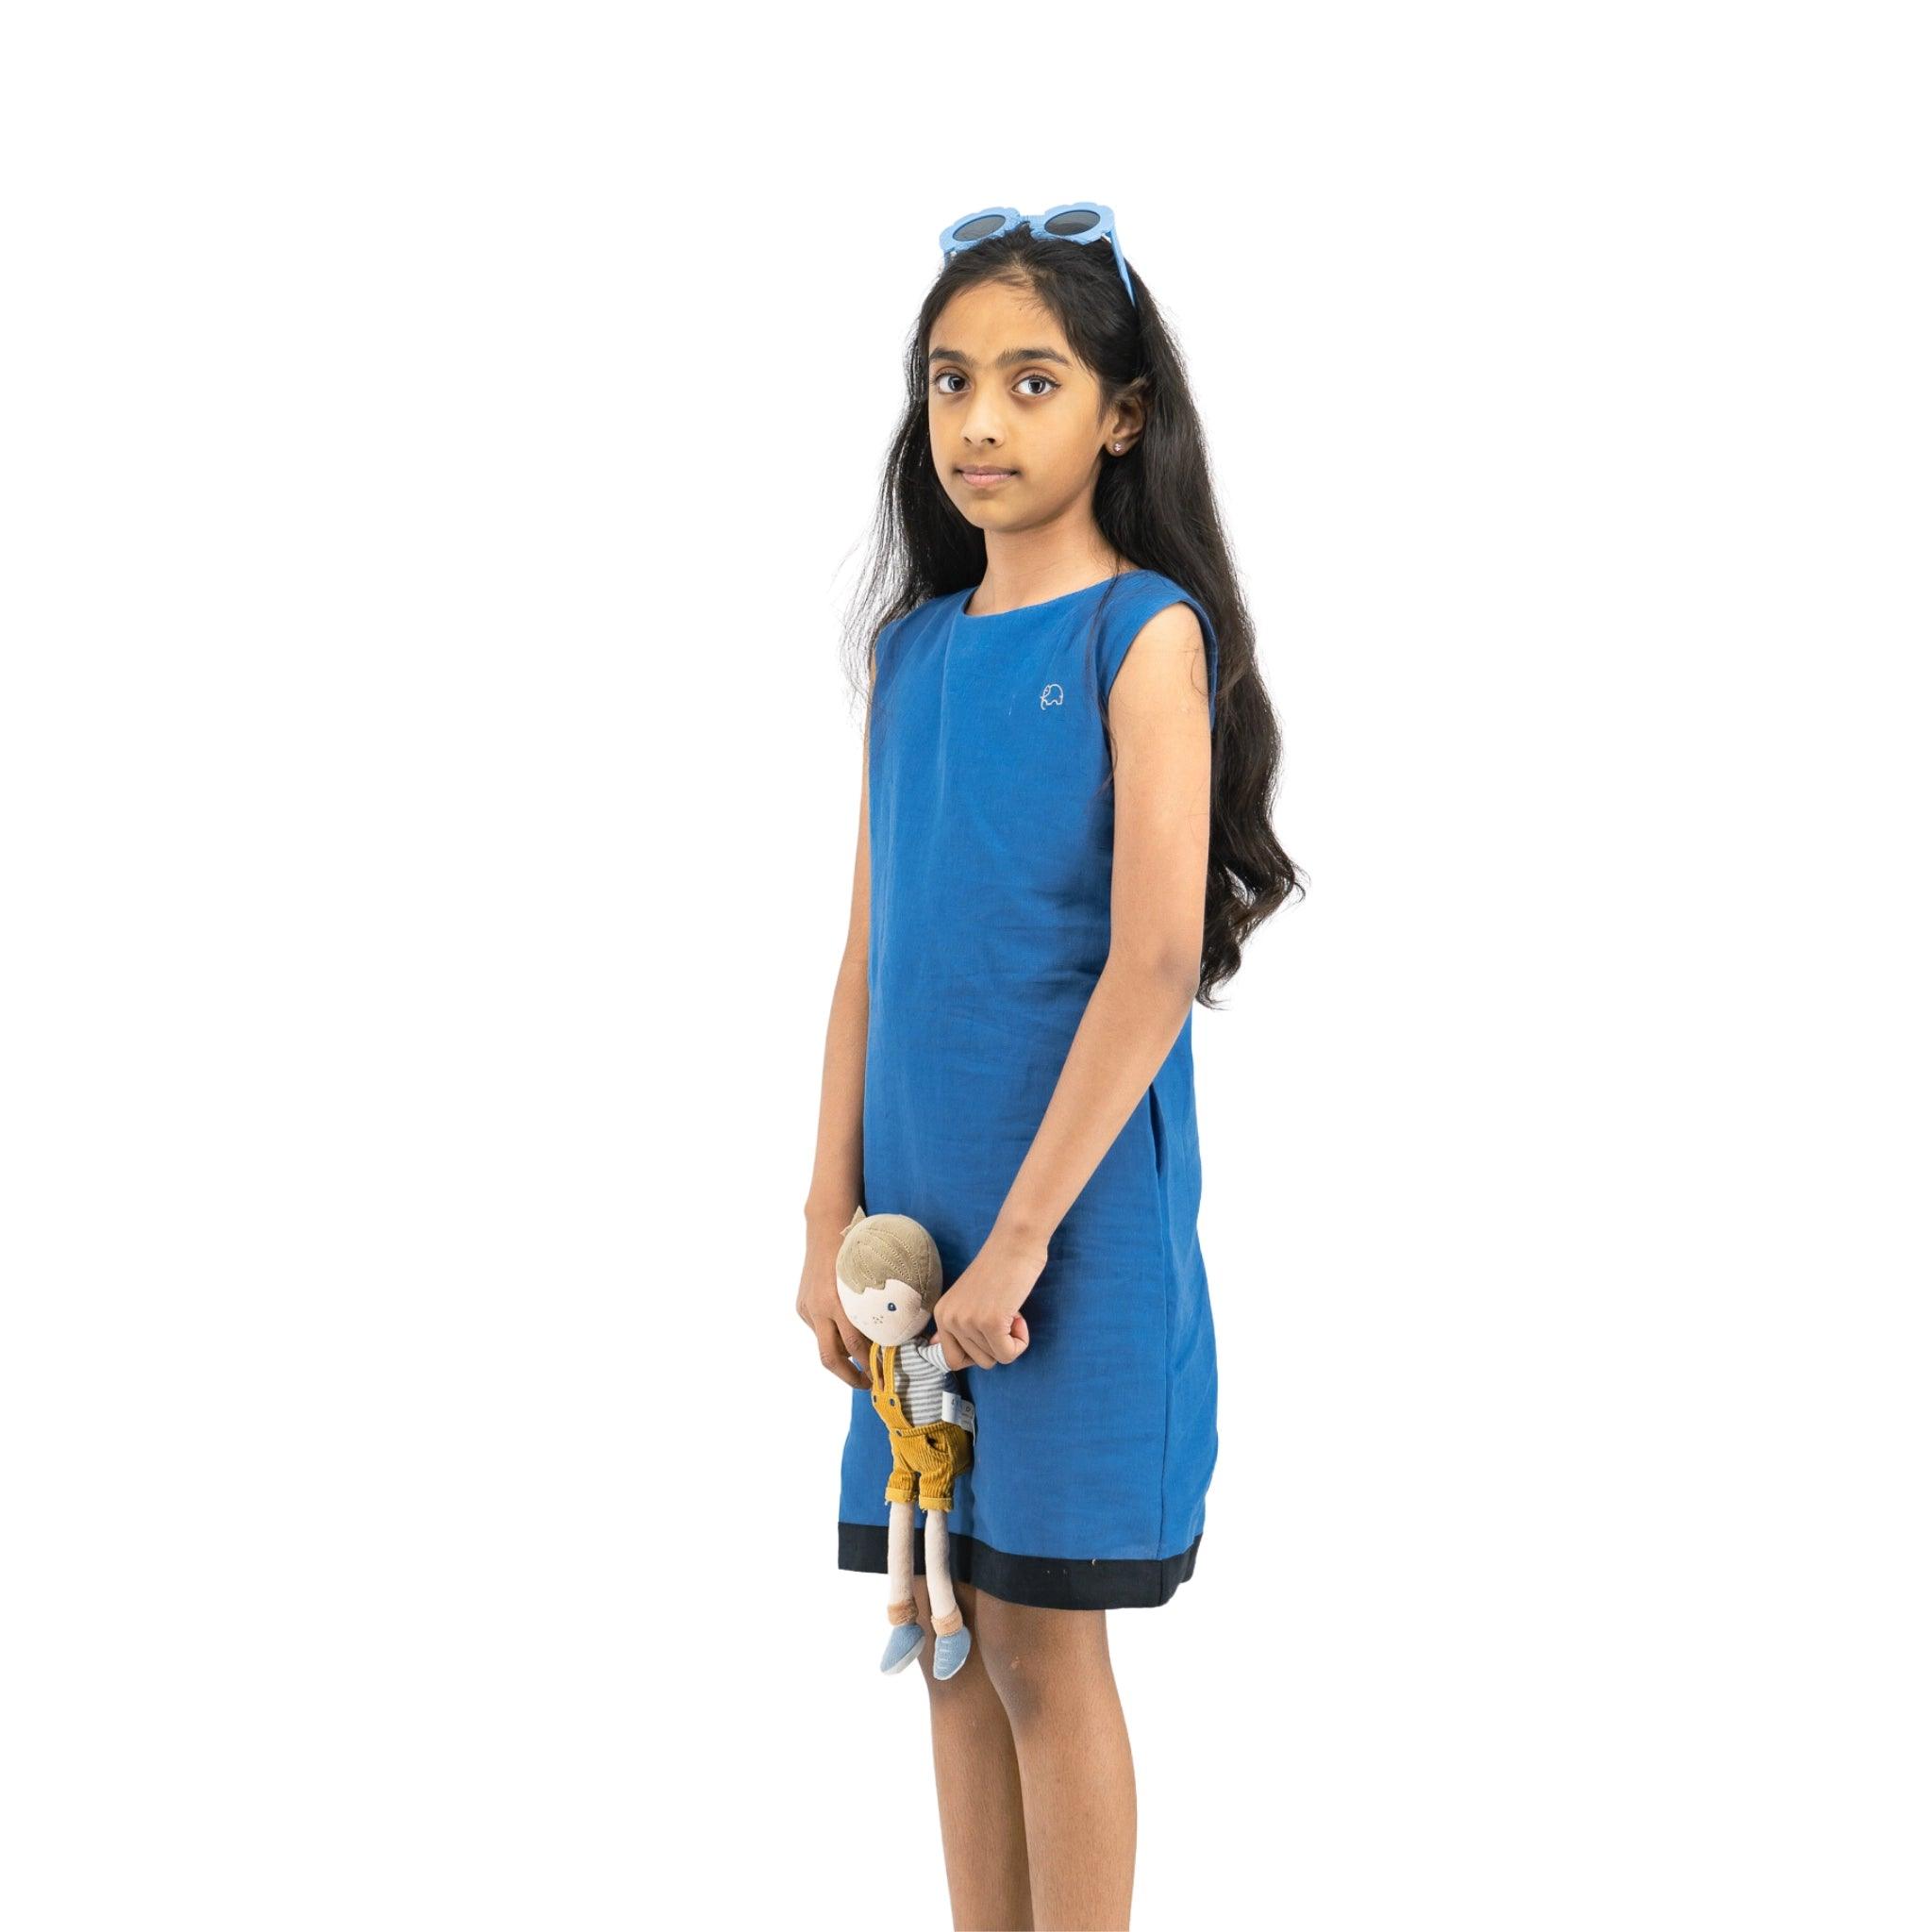 A young girl in a Karee Linen Cotton Round Neck Frock for Kids in Vallarta blue and sunglasses on her head holds a doll, standing against a white background.